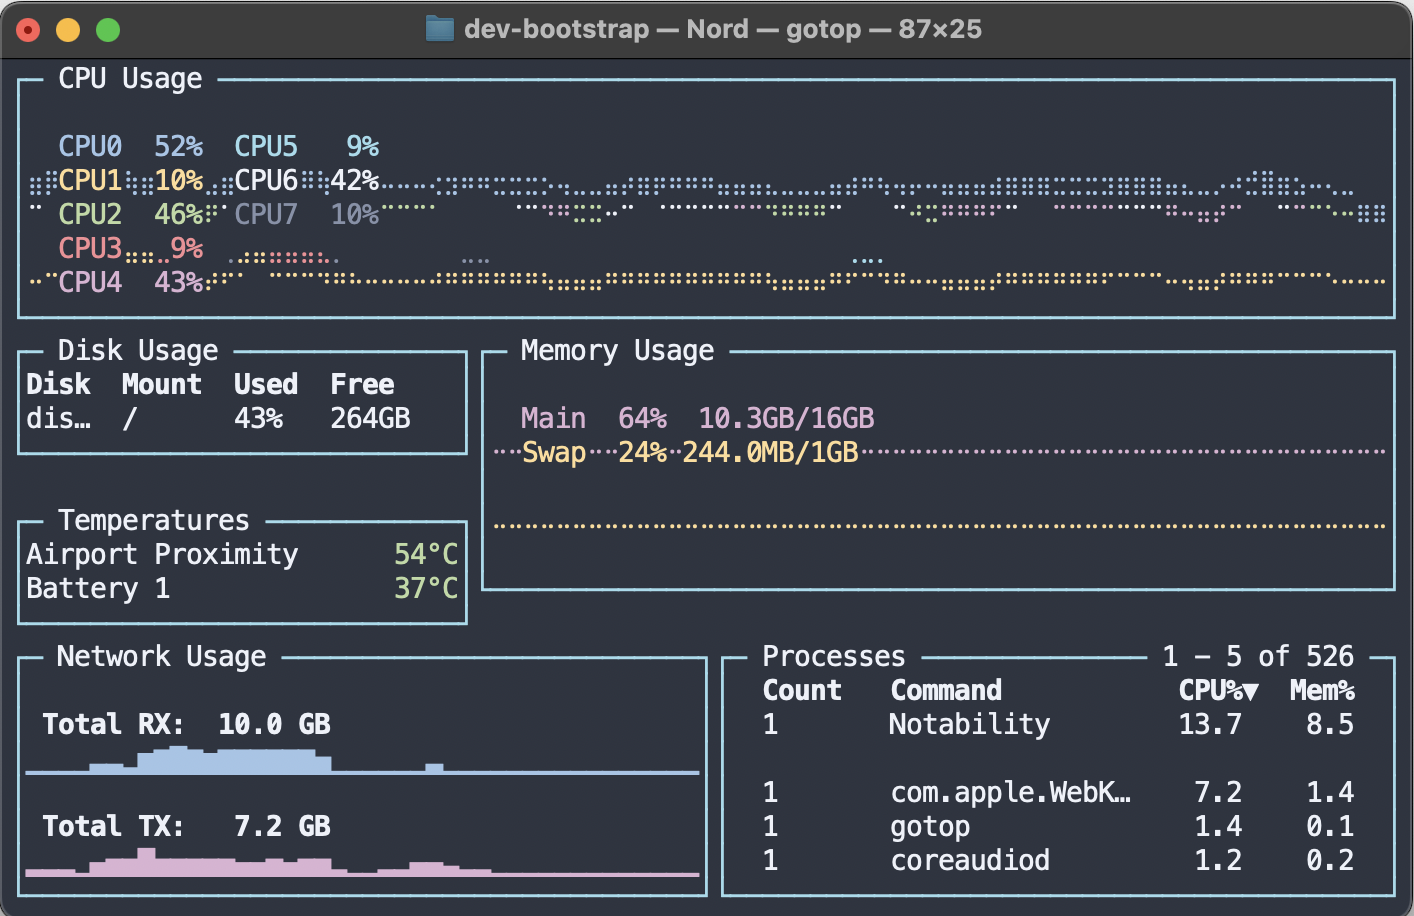 gotop running in a terminal with the nordtheme